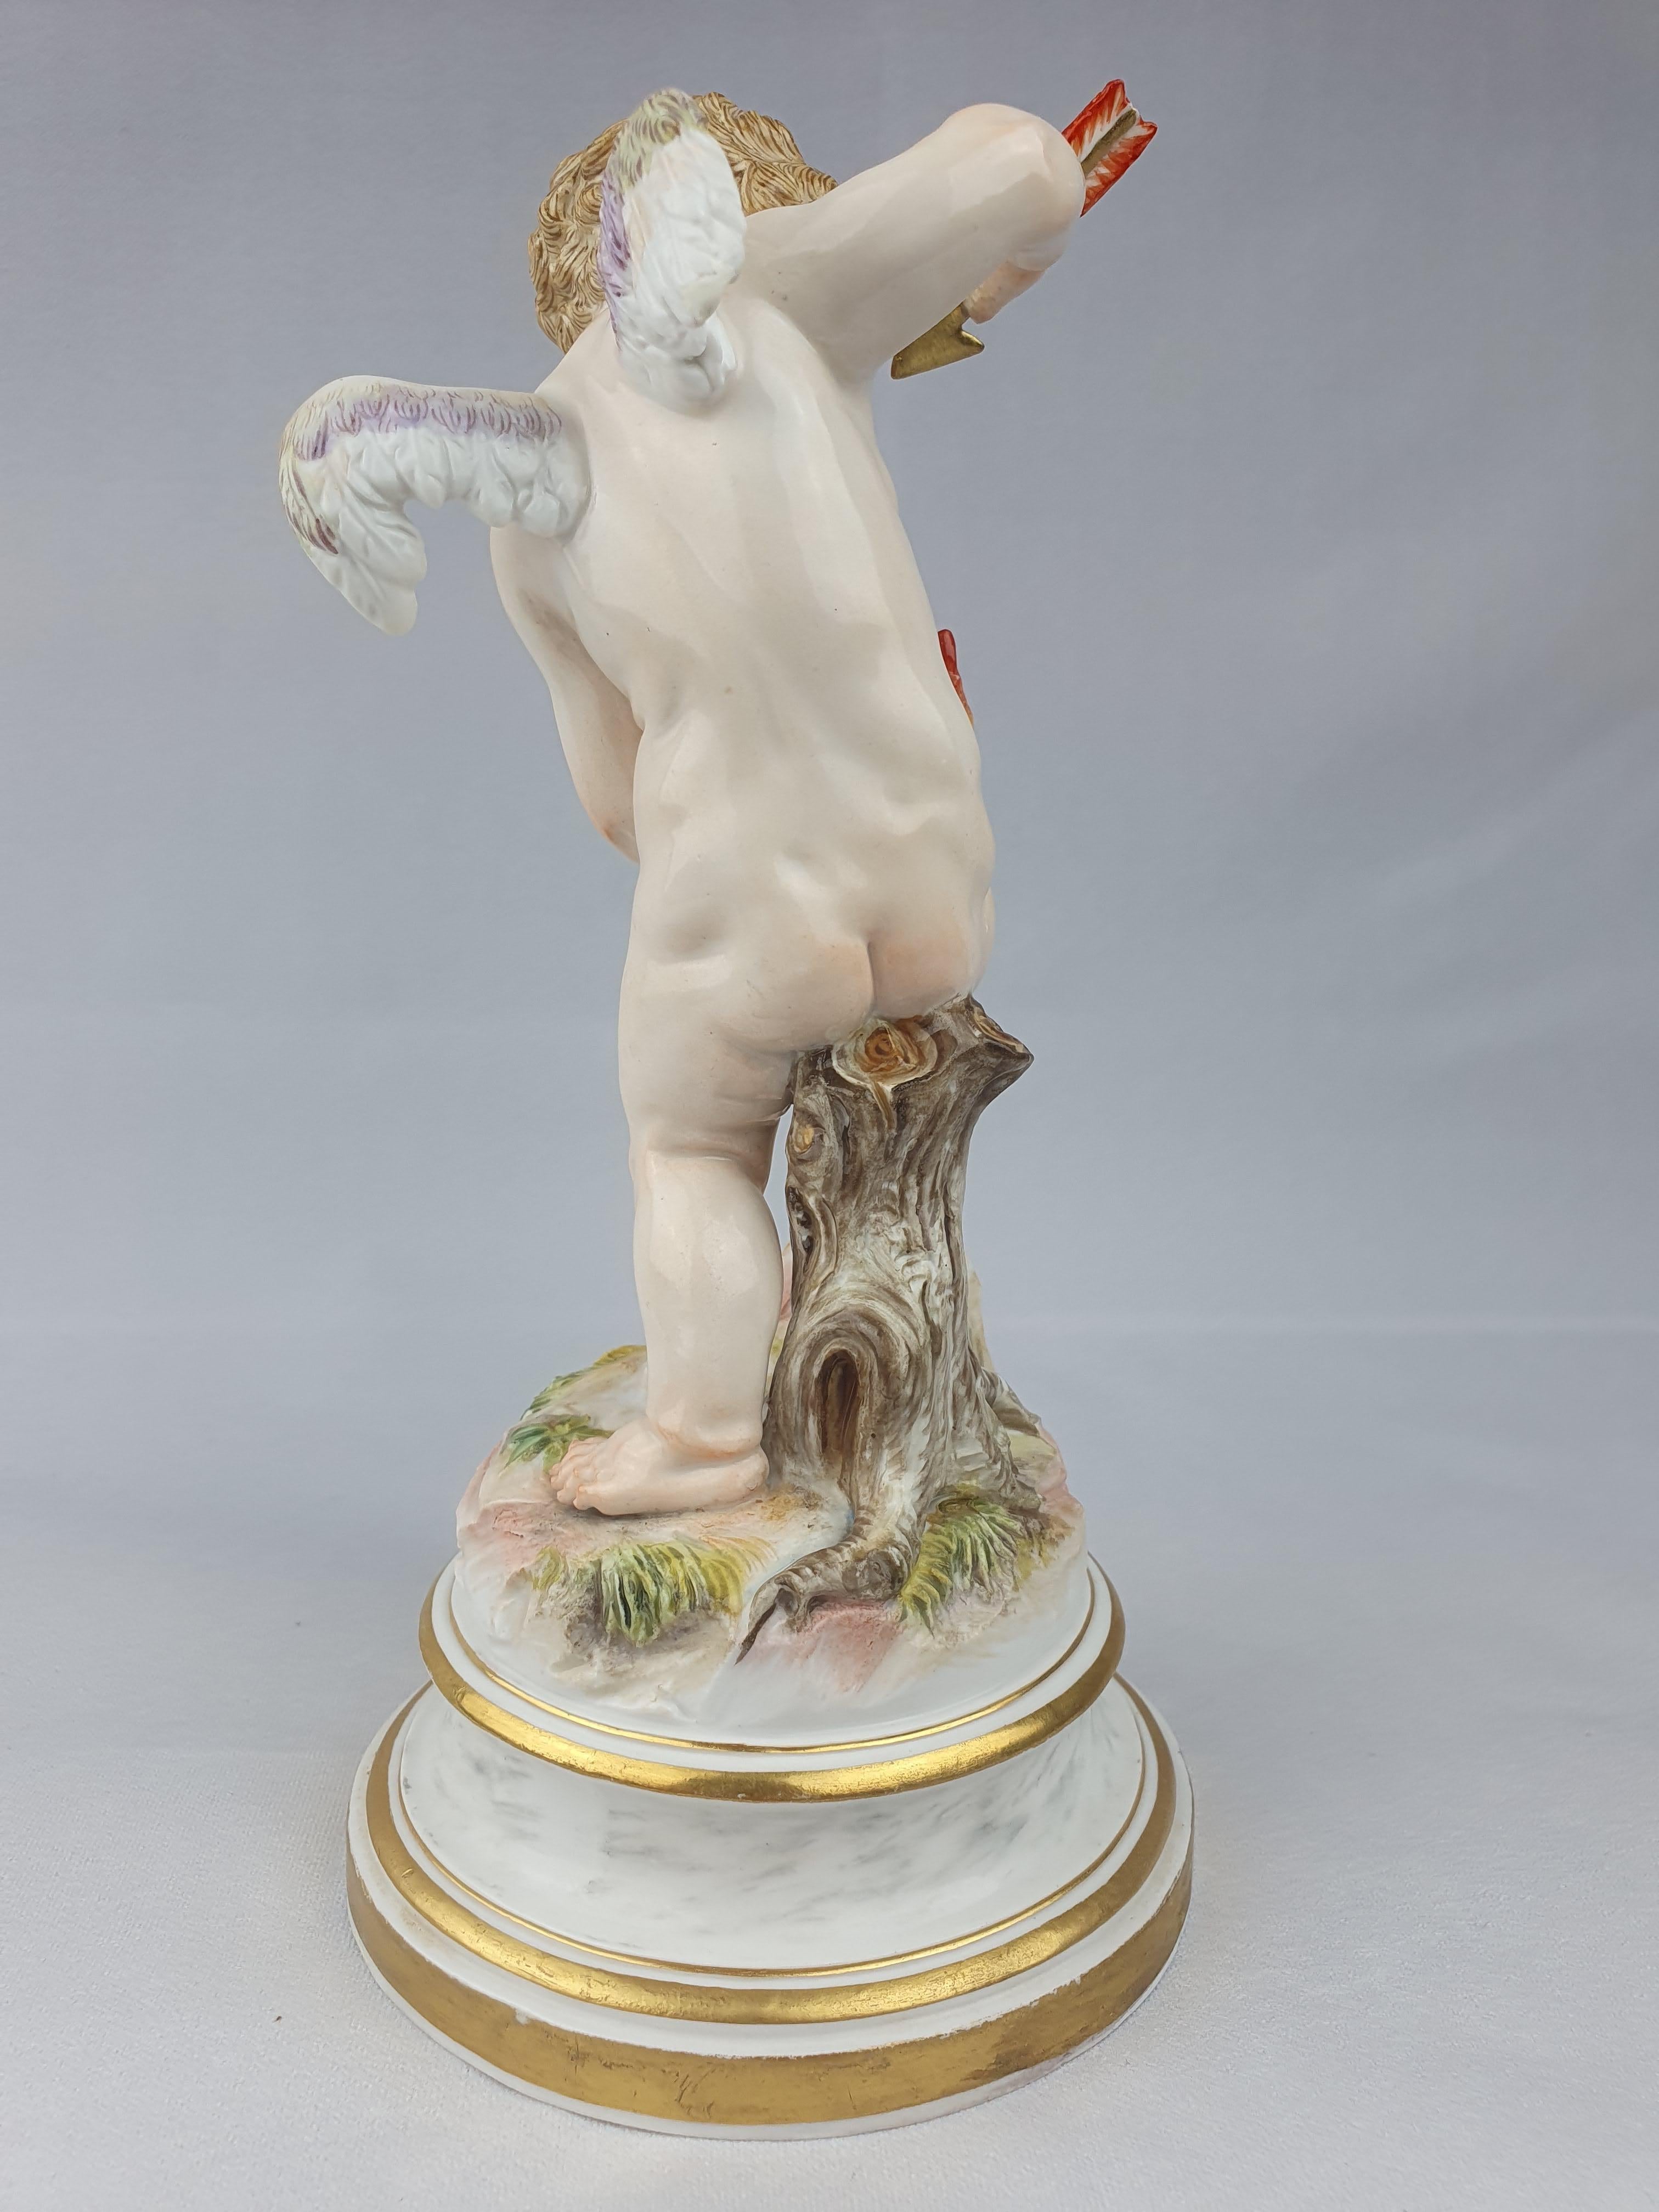 Meissen Figure of cupid stabbing heart with arrow from a series of 27 cupids first modelled by Heinrich Schwabe 1878. Circa 1890

Model L10 & Painters mark 40

Cross swords in underglaze blue.